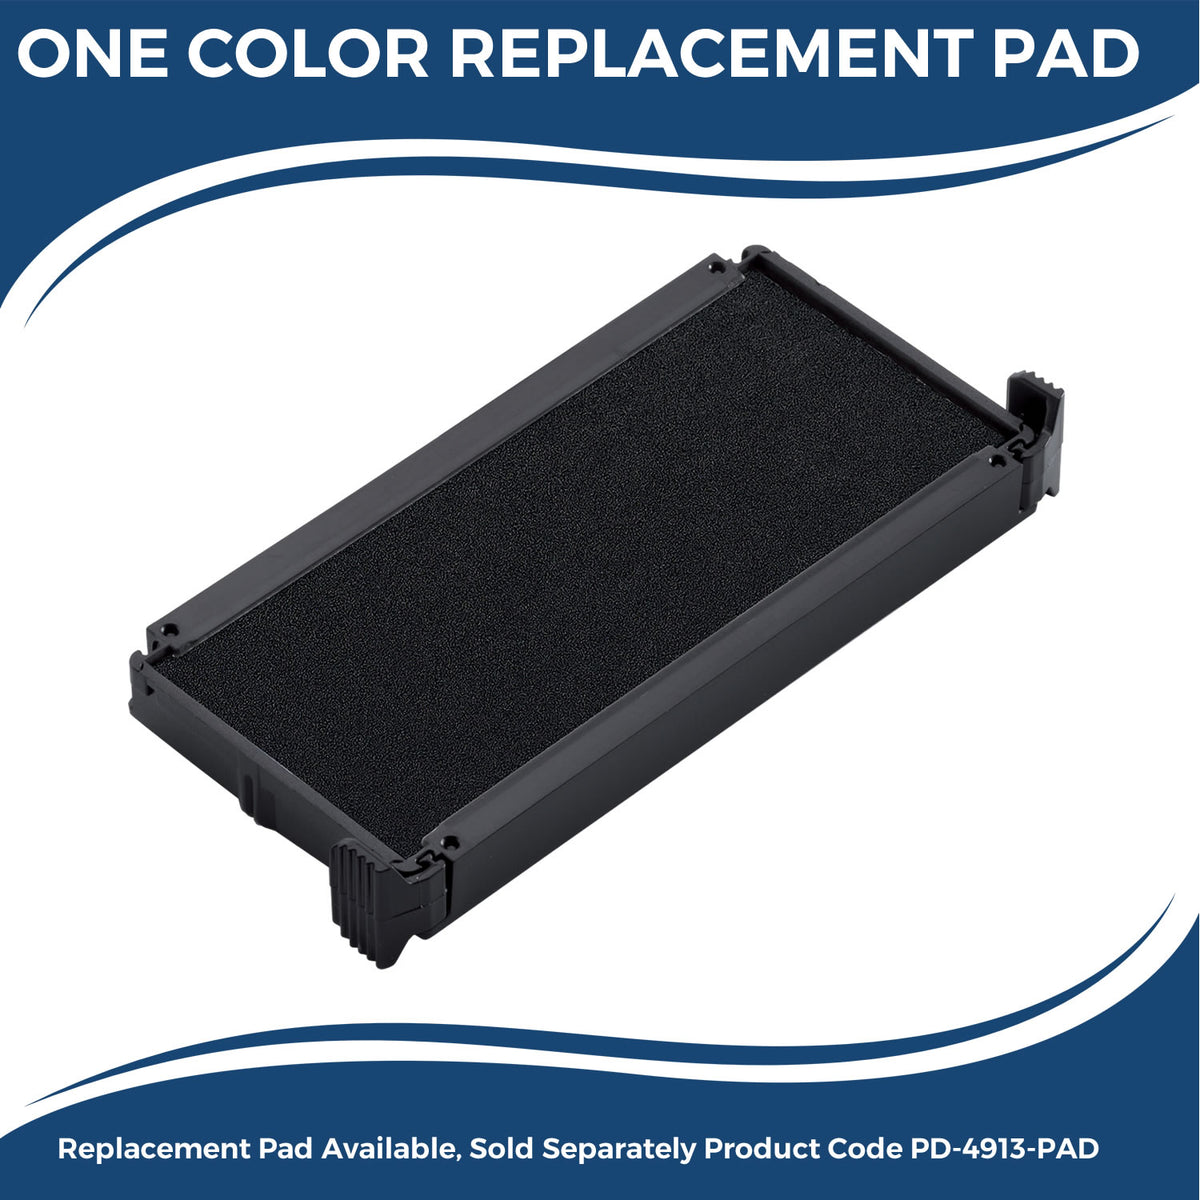 Large Self Inking Blue Shield Stamp 4533S Large Replacment Pad